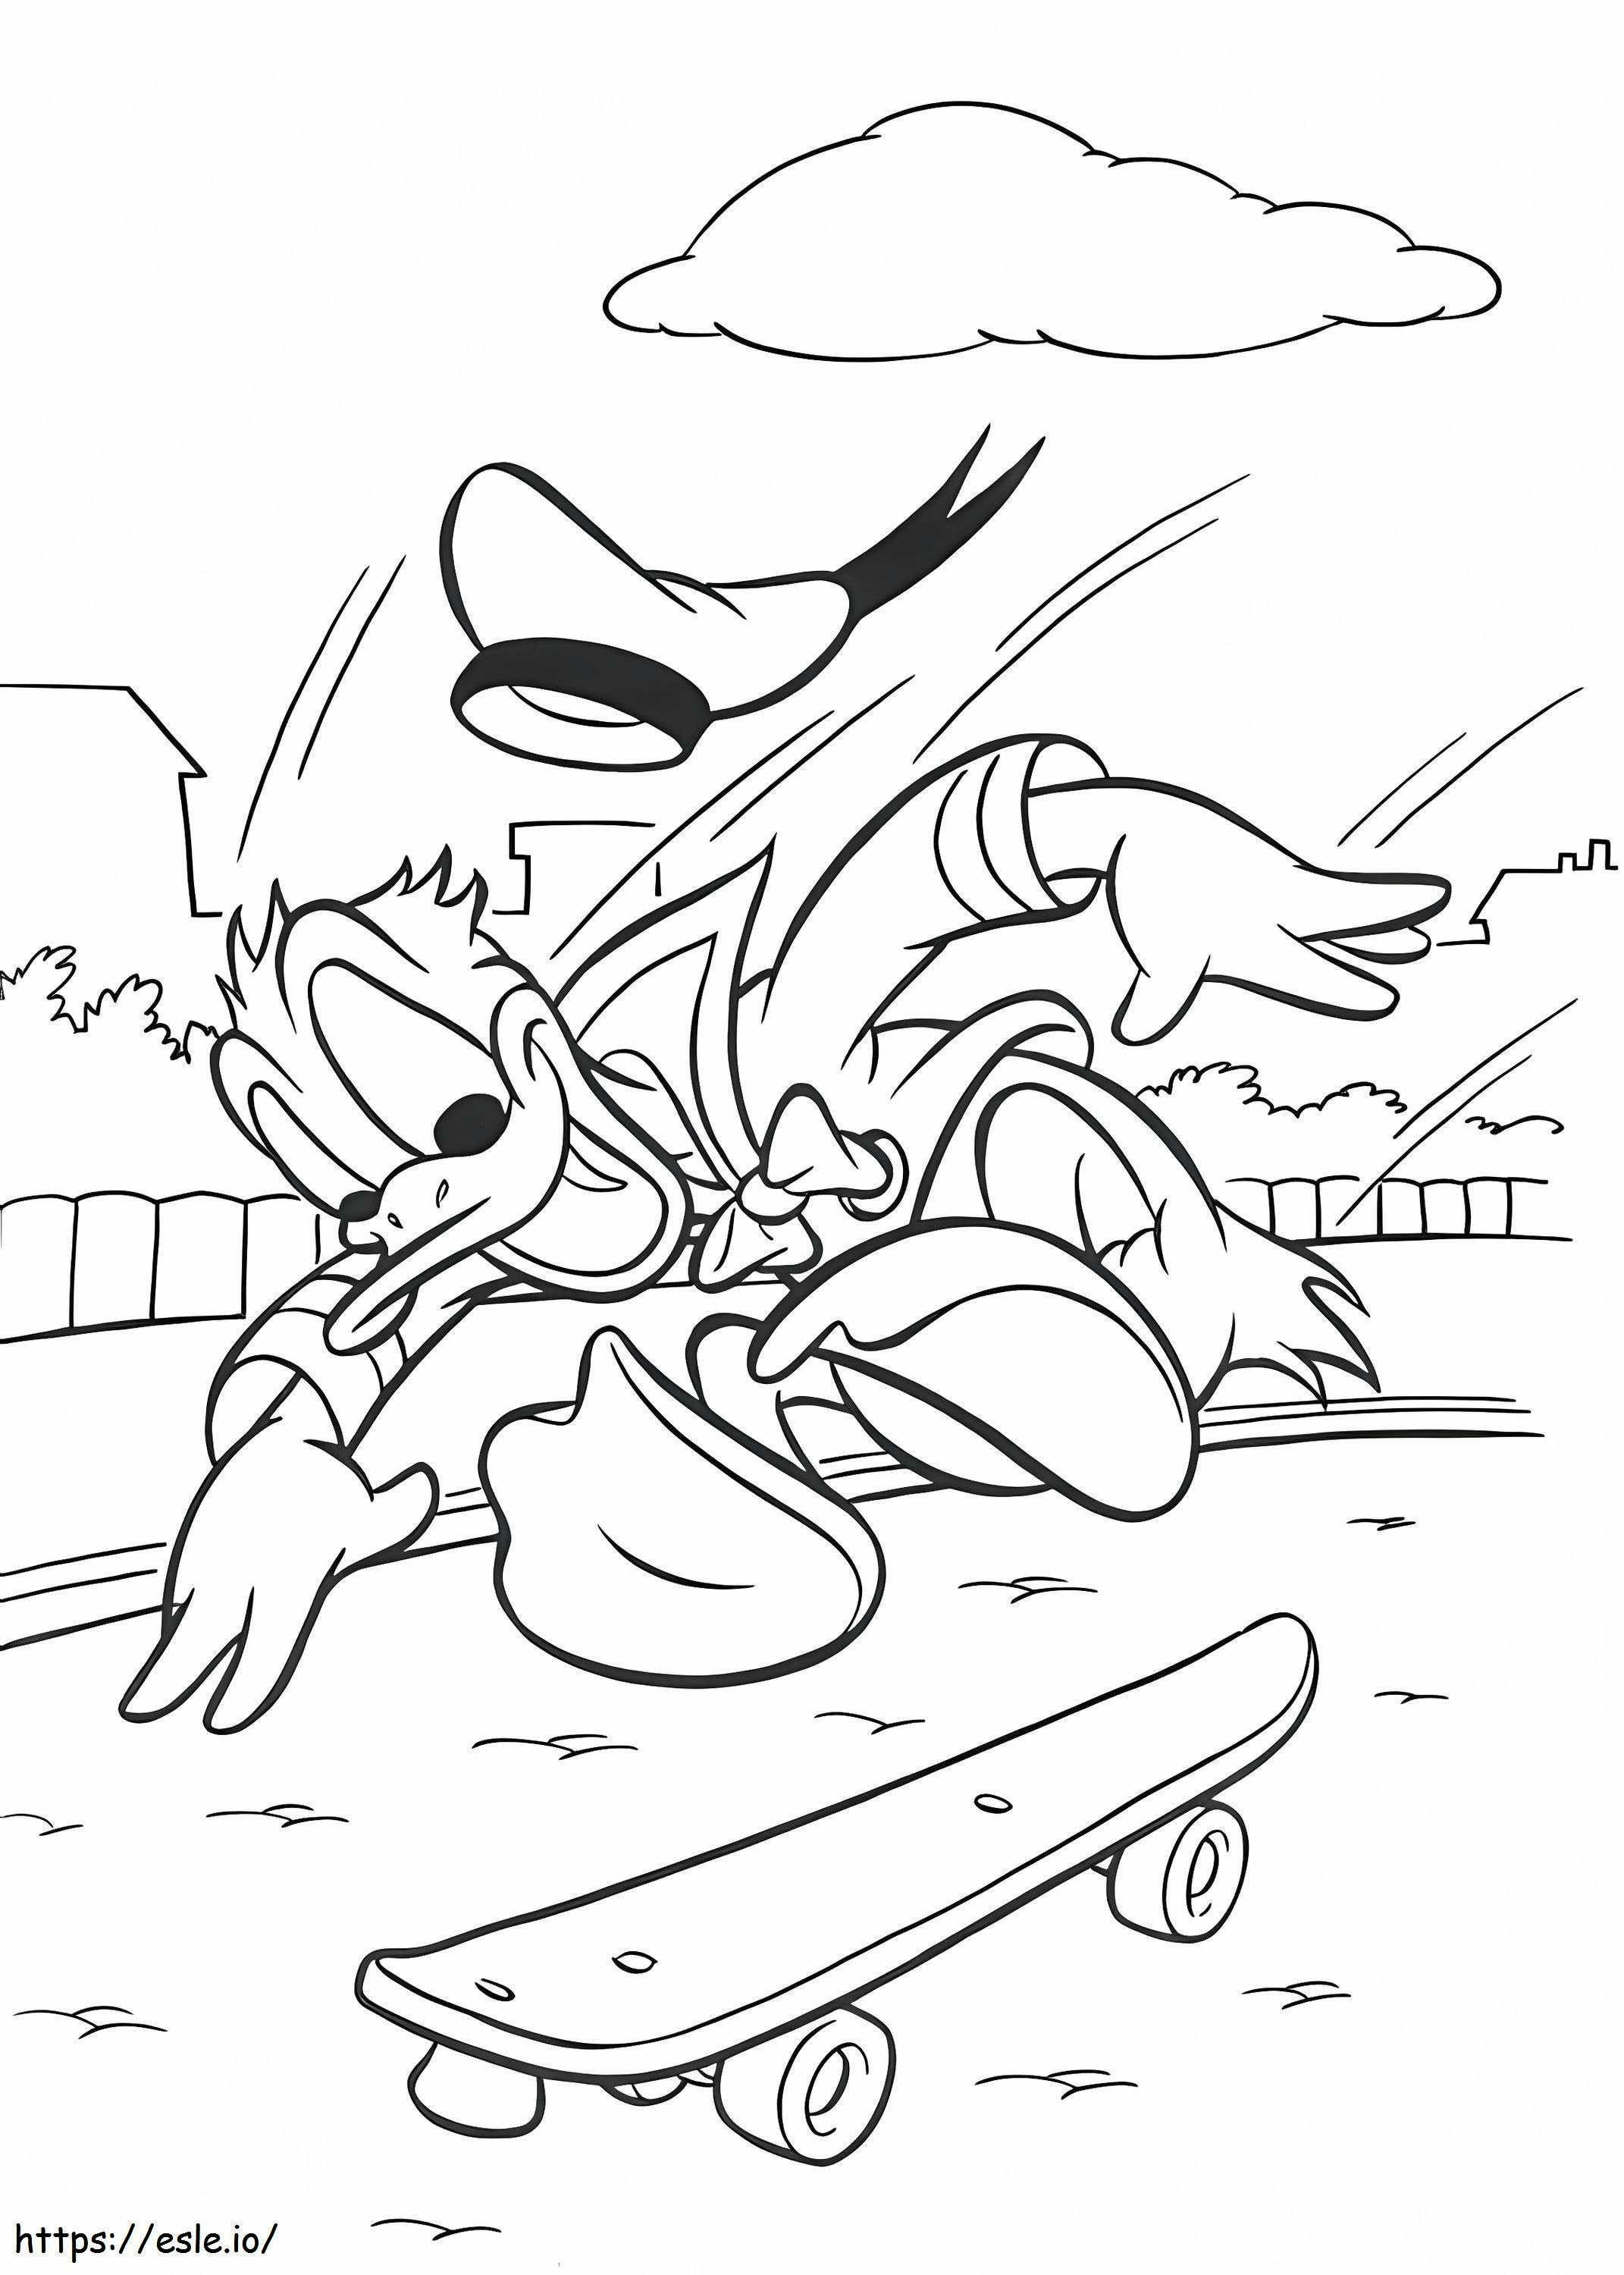 1534756643 Donald Skateboarding A4 coloring page